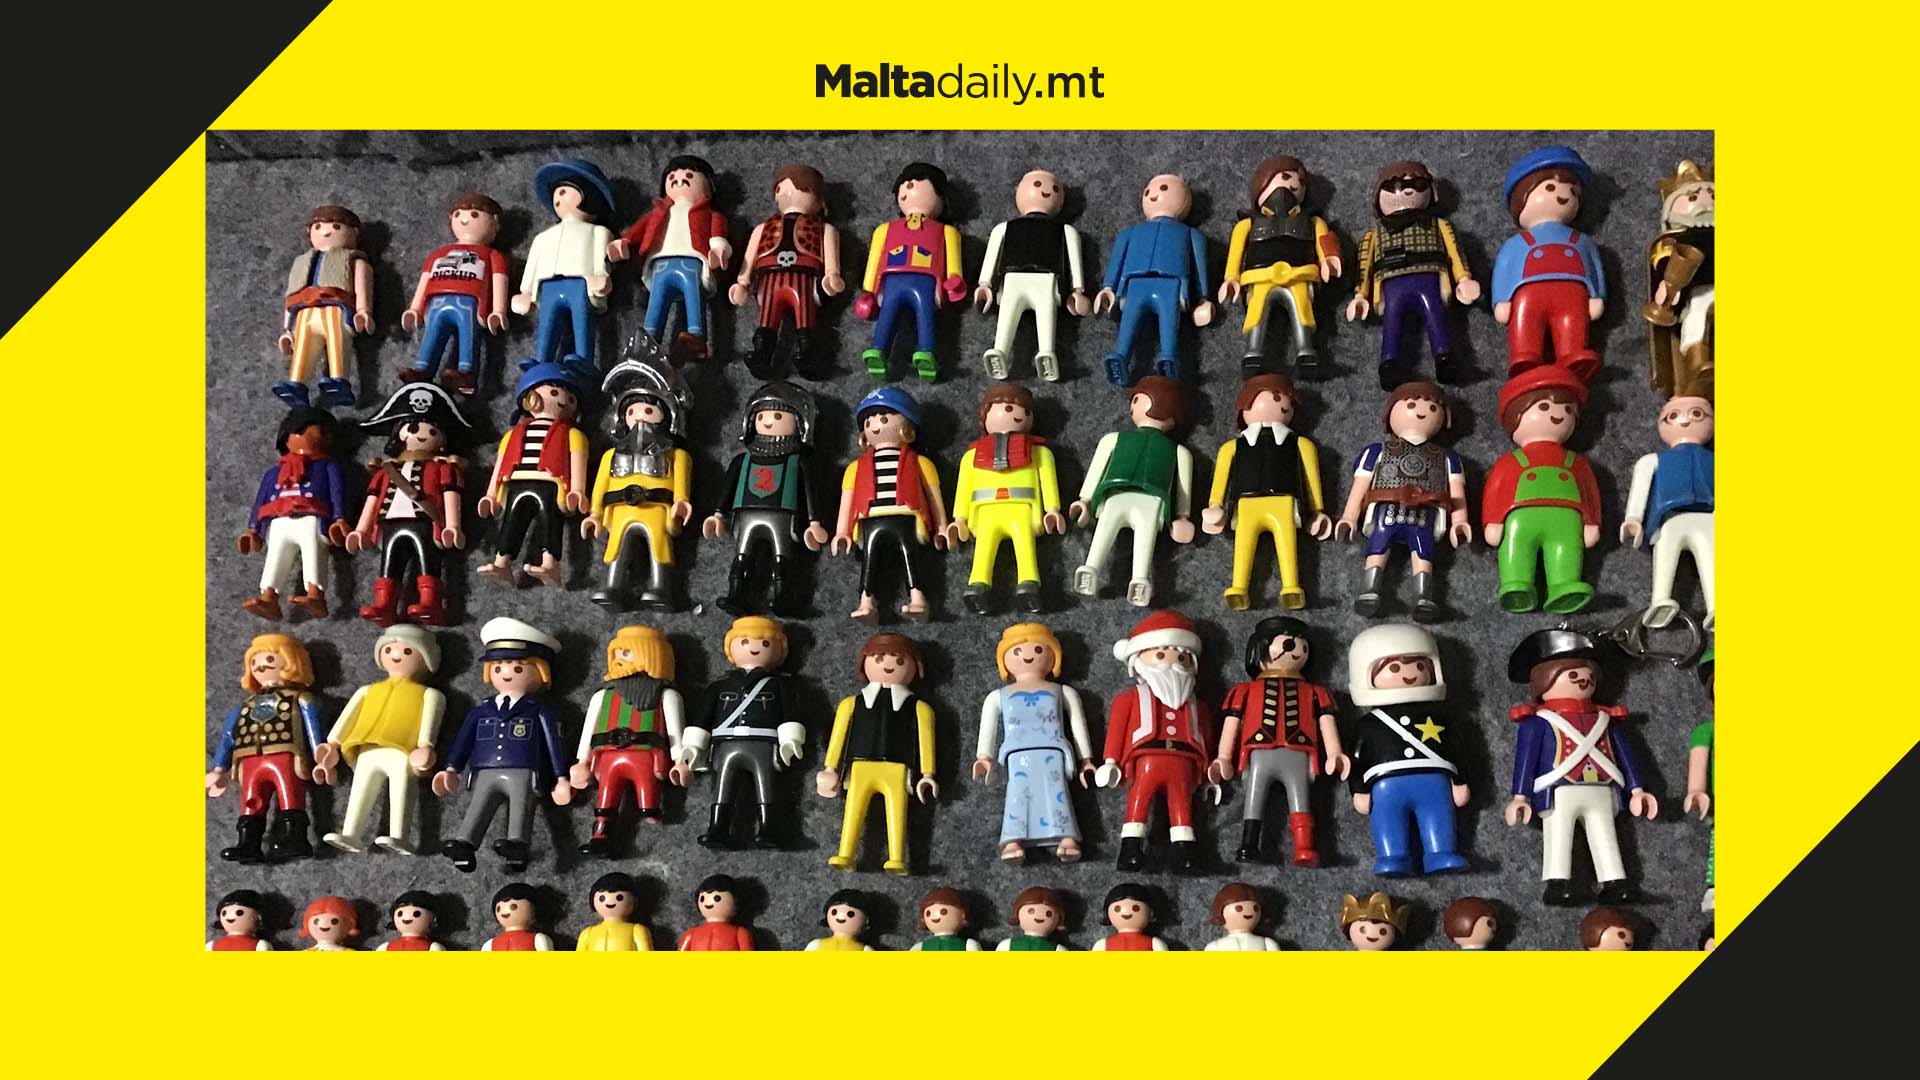 Men facing charges for stealing €10,000 worth of Playmobil figures